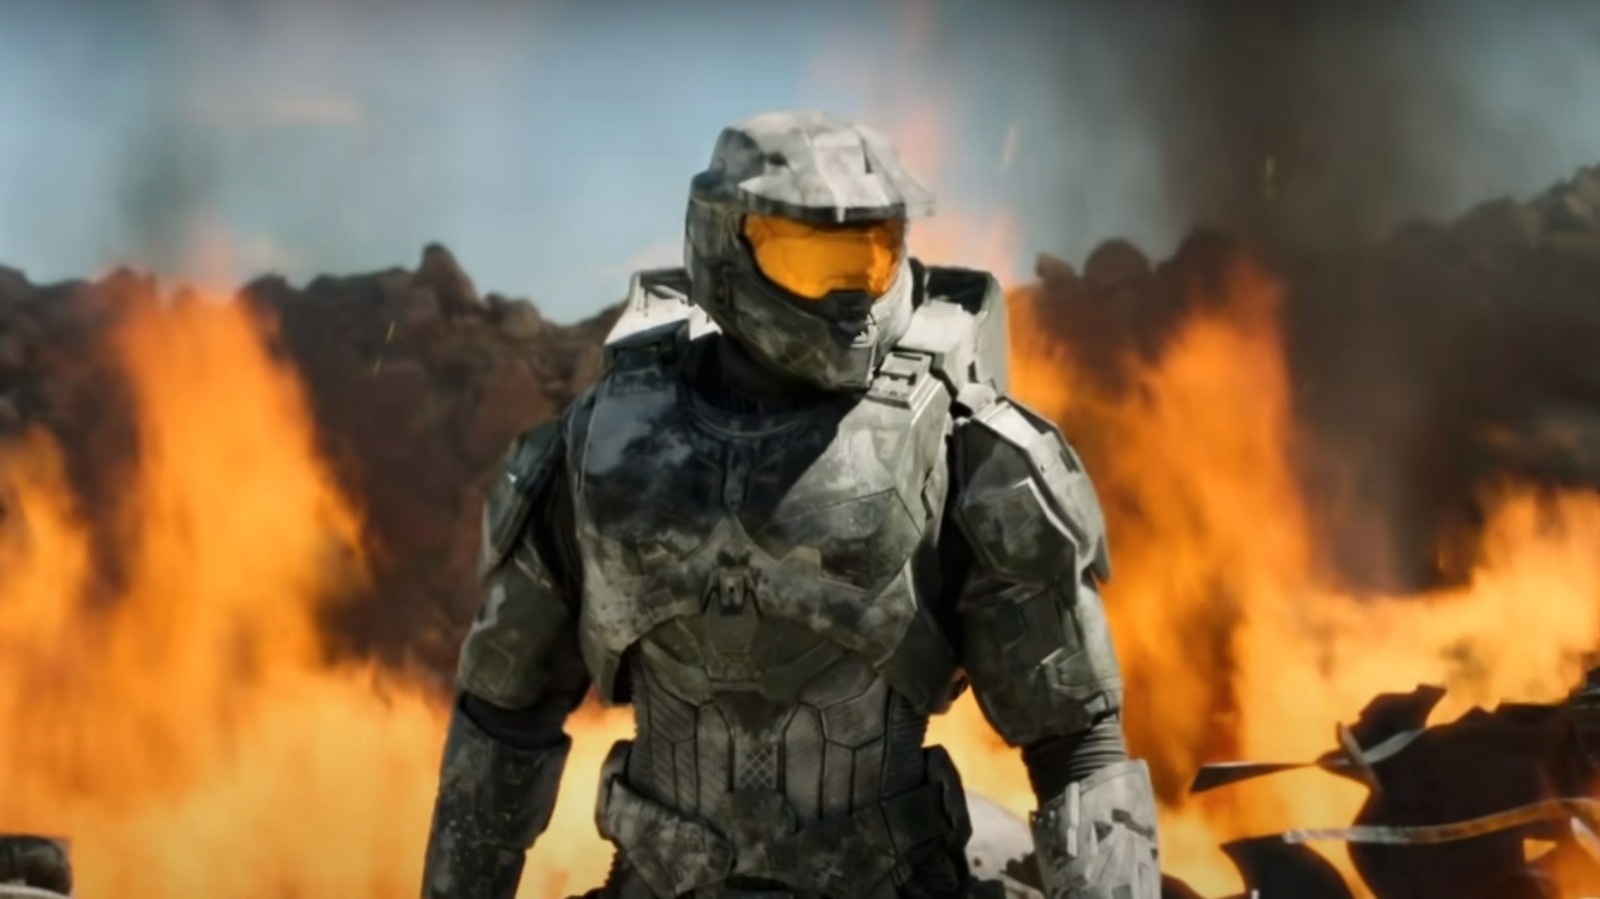 Halo TV series confirmed to feature Master Chief